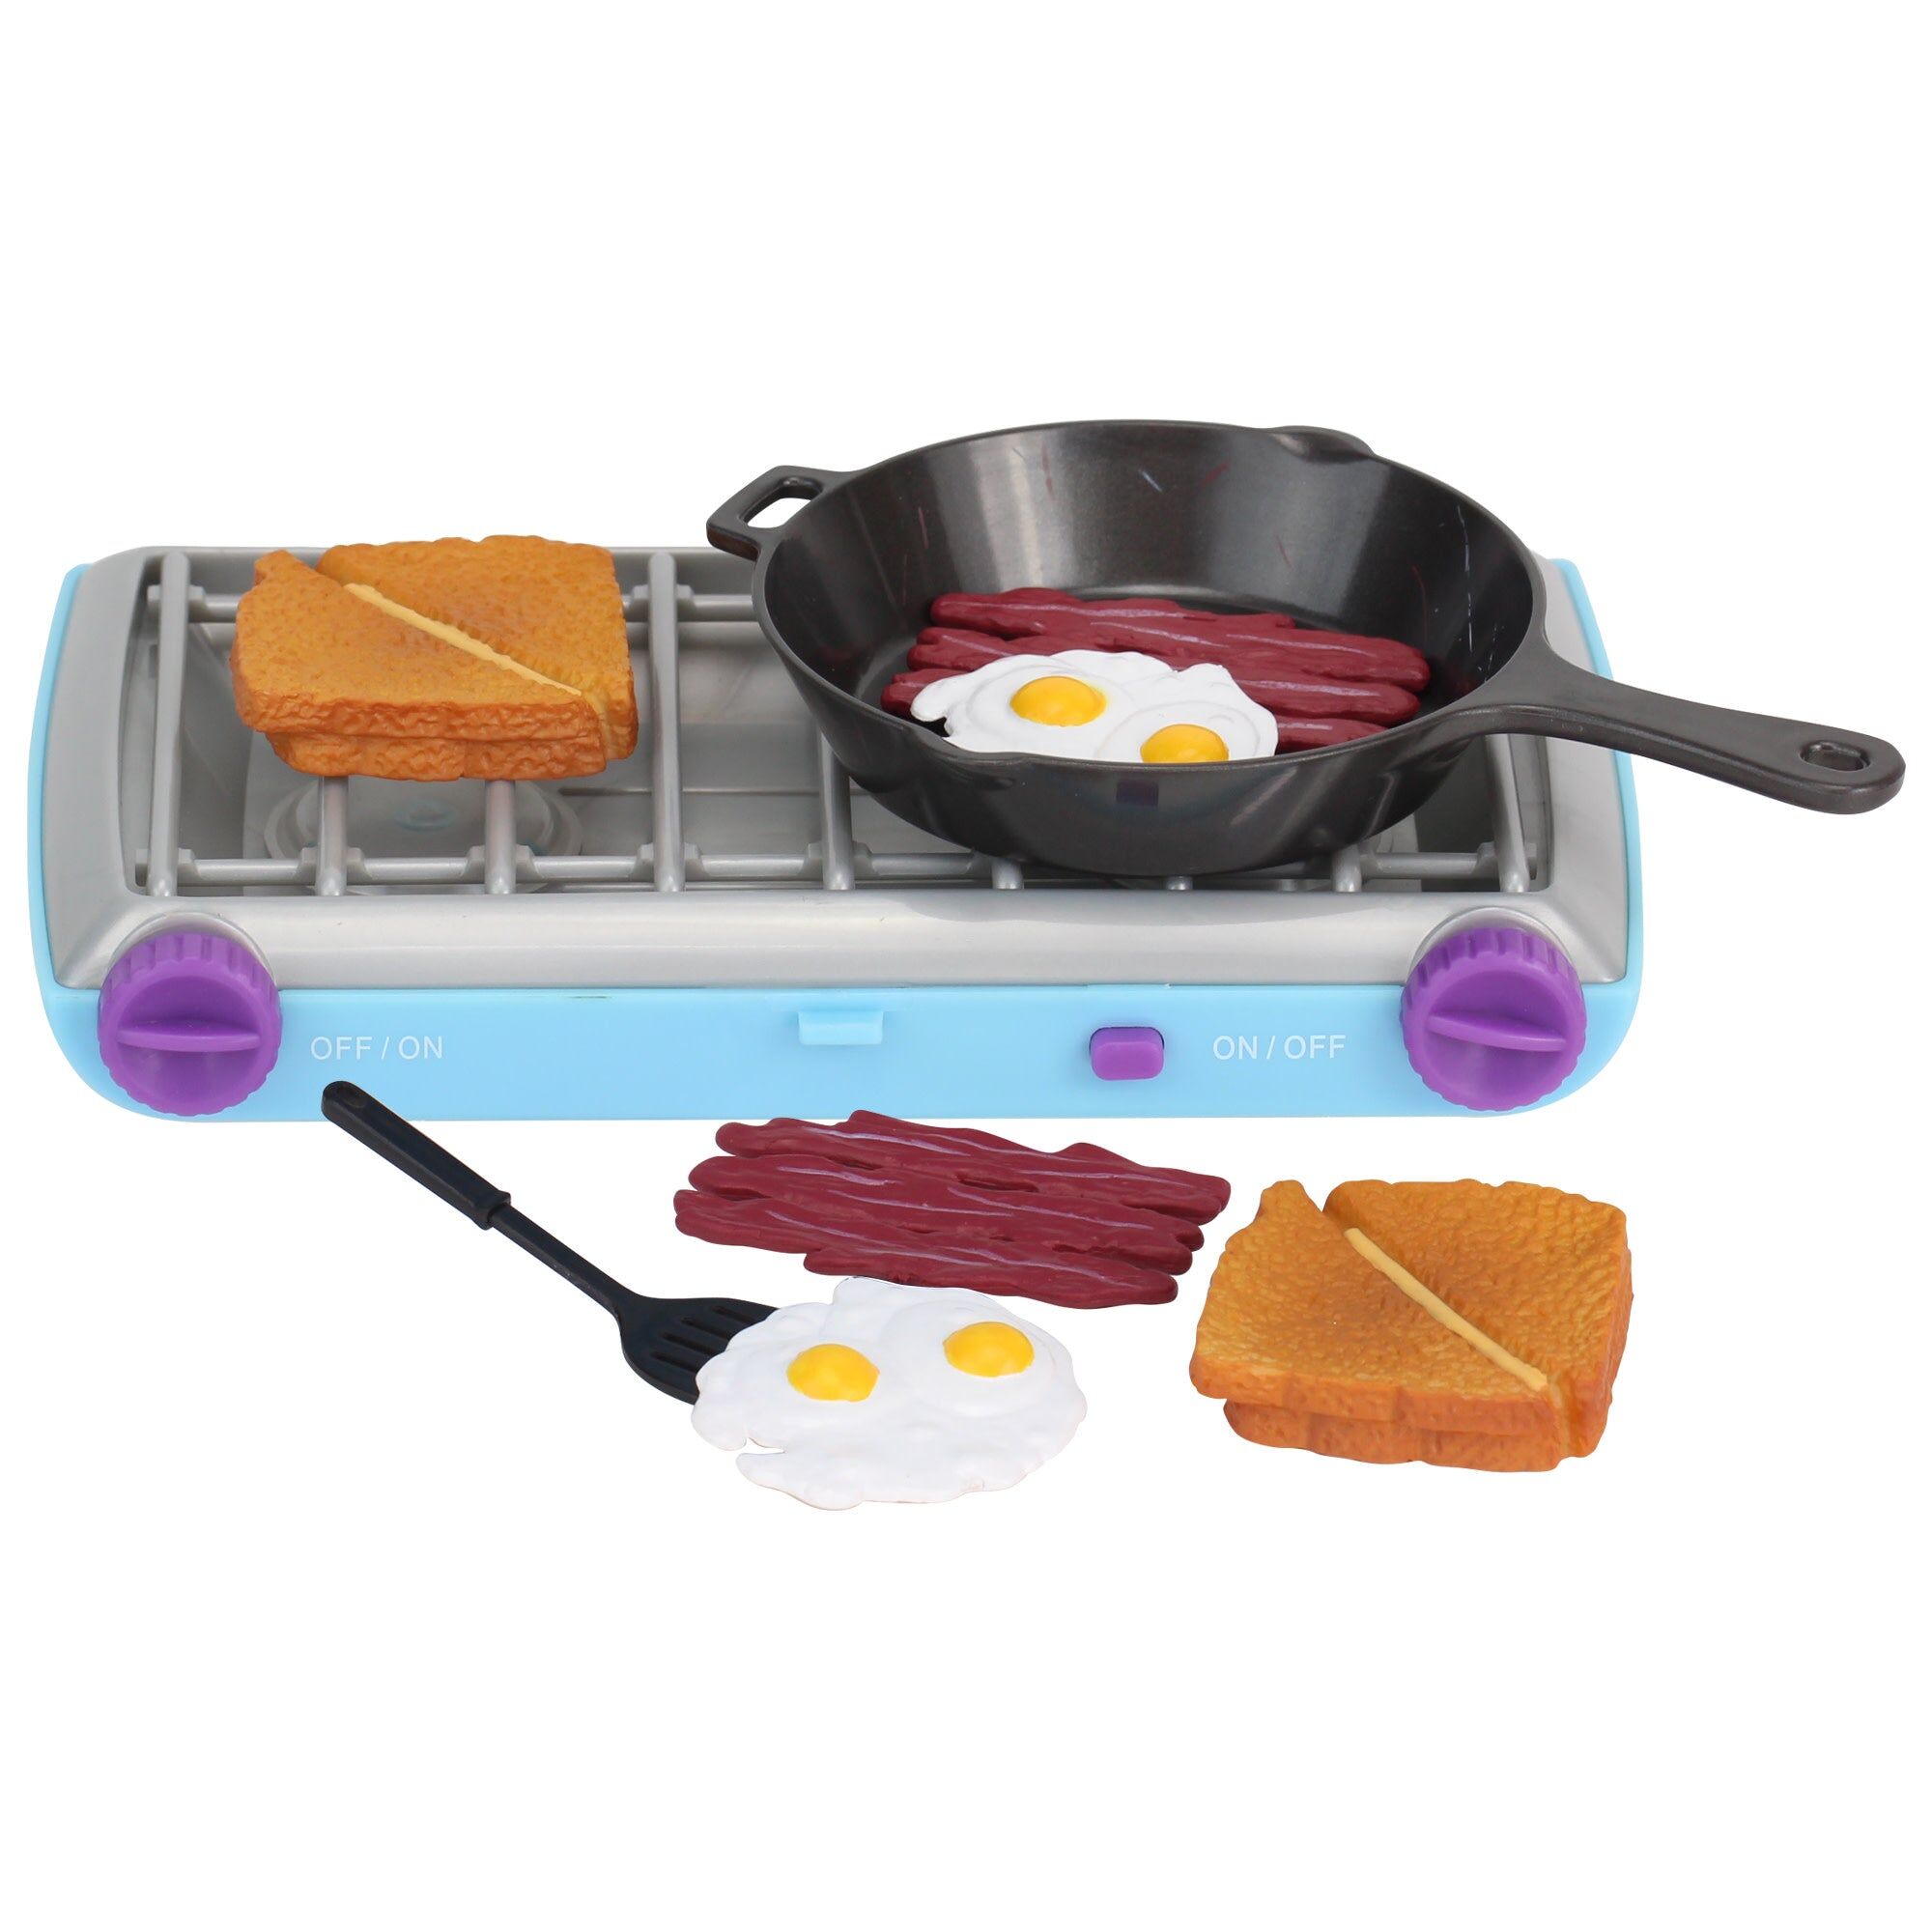 Teamson Sophia's 9 Piece Camp Stove and Food Set for 18" Dolls, Multicolor